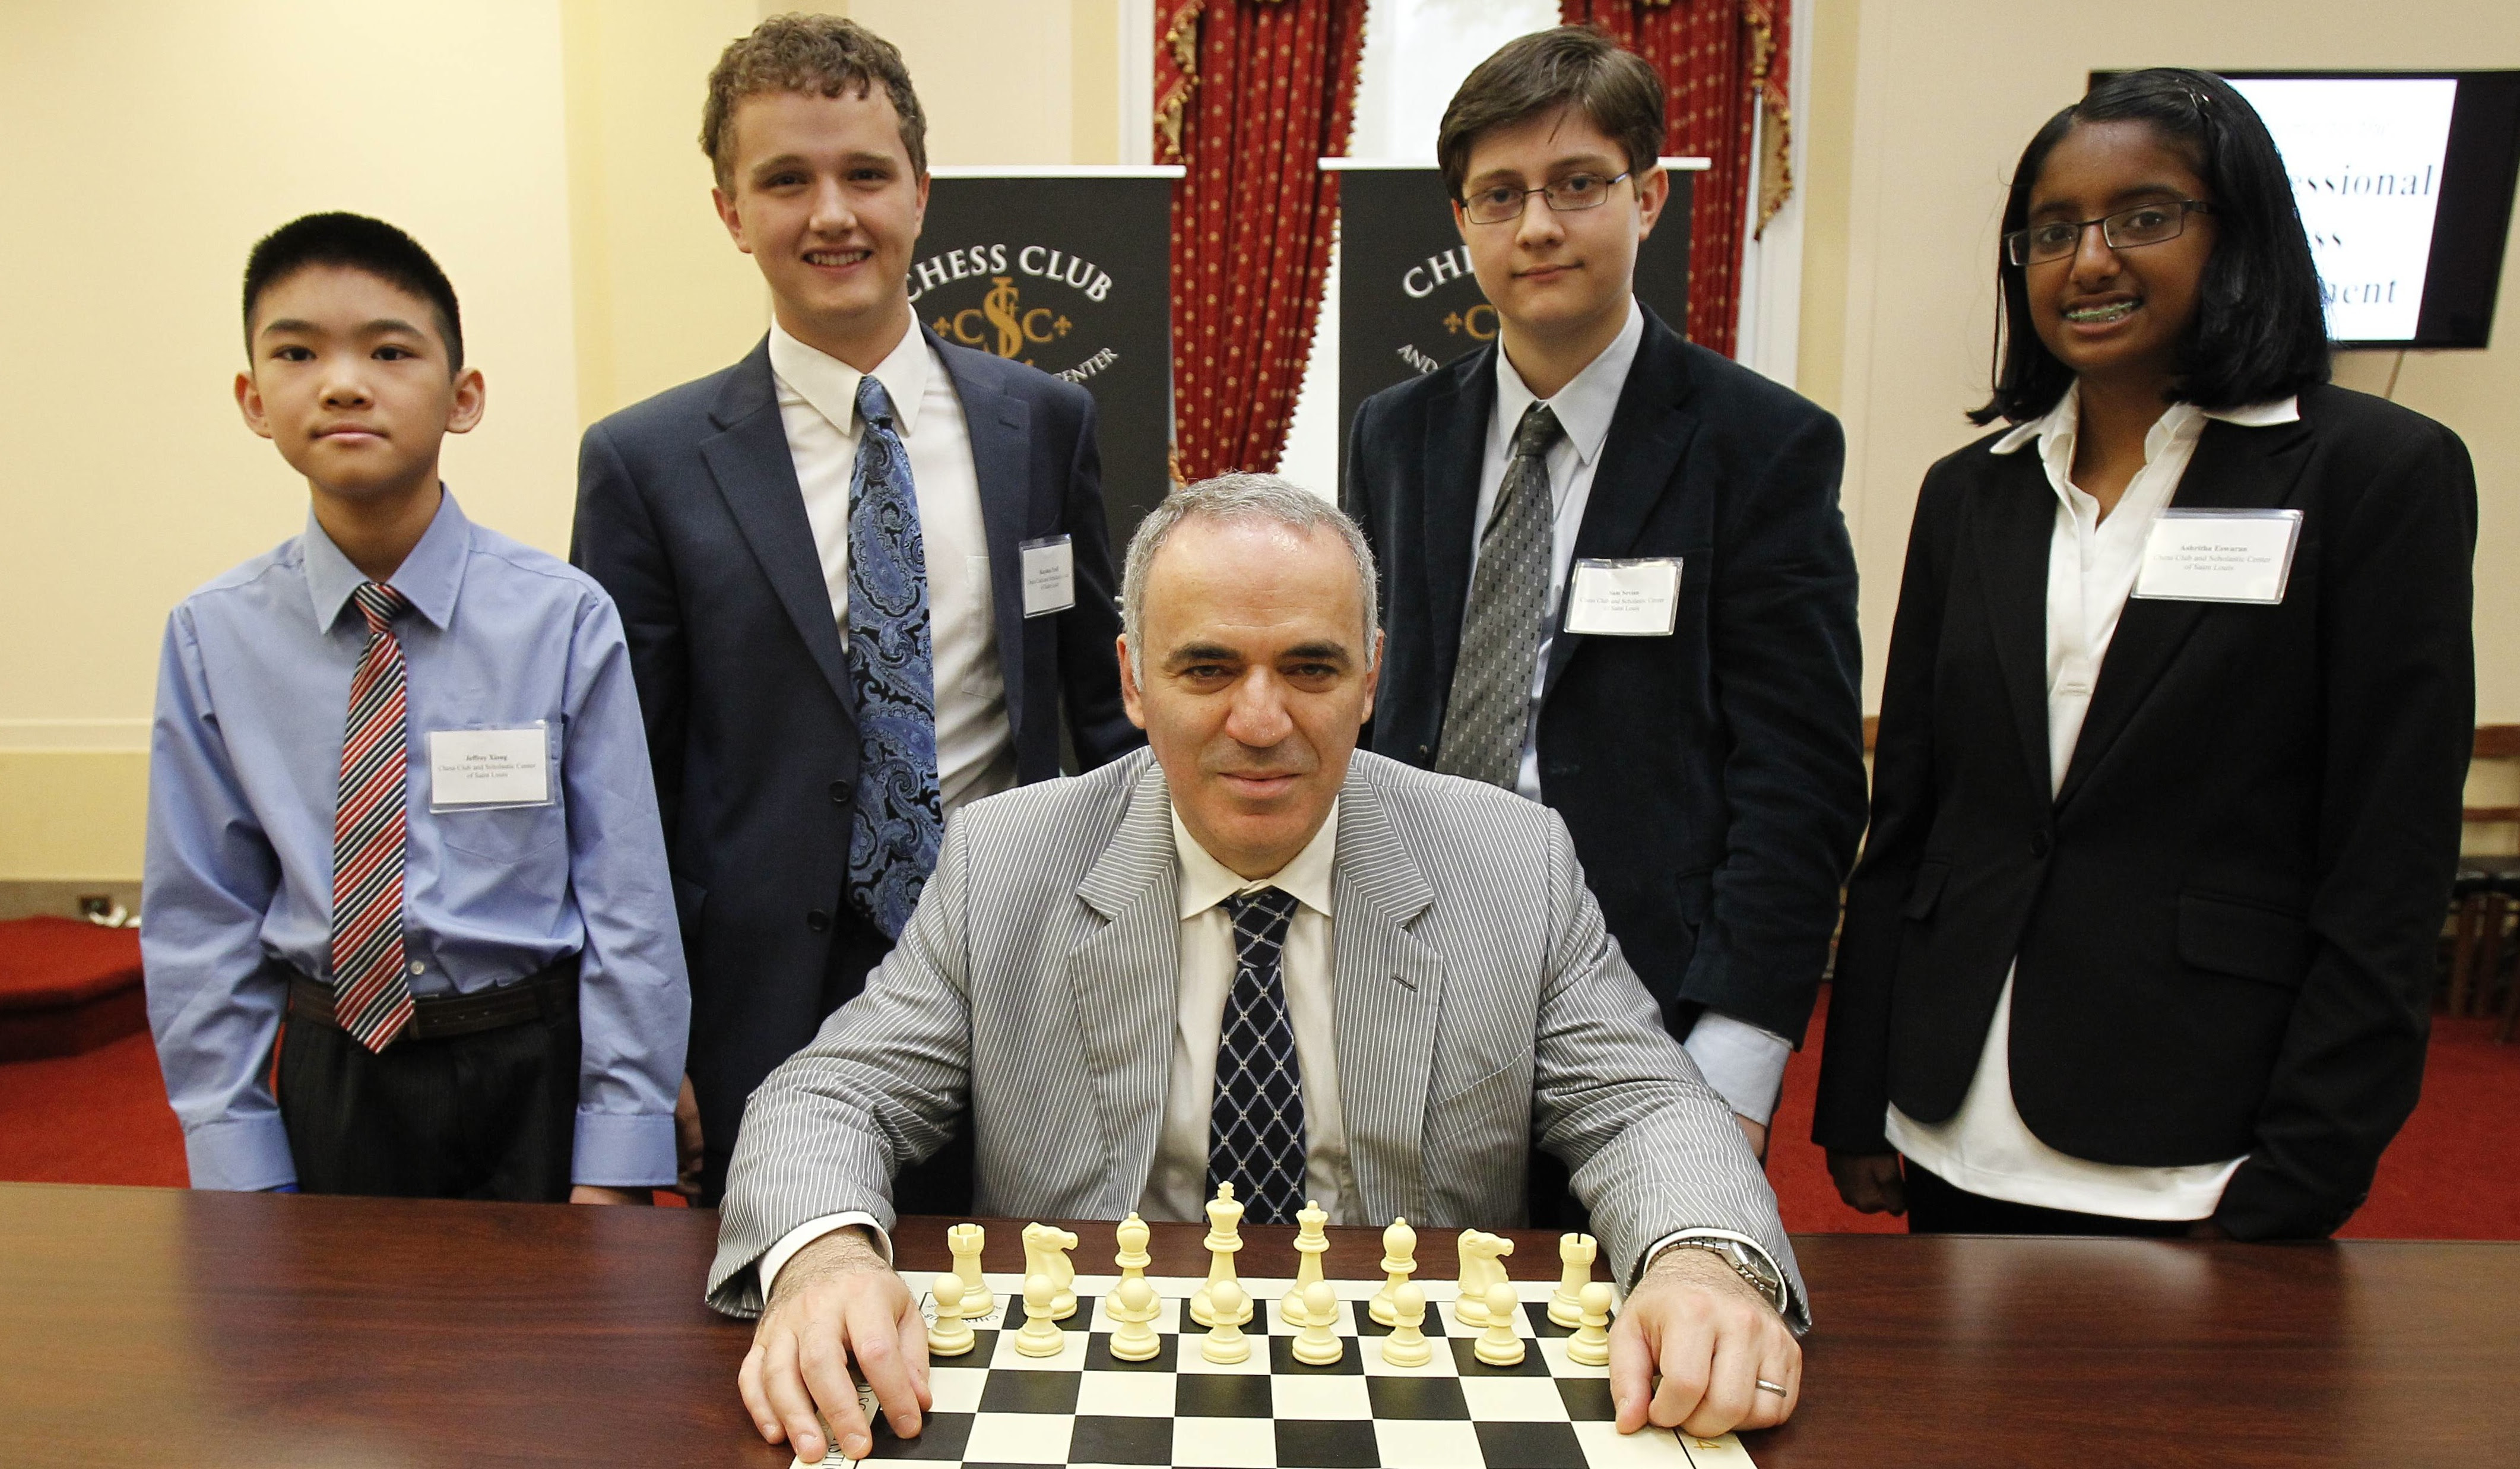 The first-ever Congressional Chess Match at the Rayburn House Office Building on Wednesday, June 18, 2014 in Washington, DC. (Photo by Paul Morigi/Invision for Invision for Saint Louis Chess Club/AP Images)